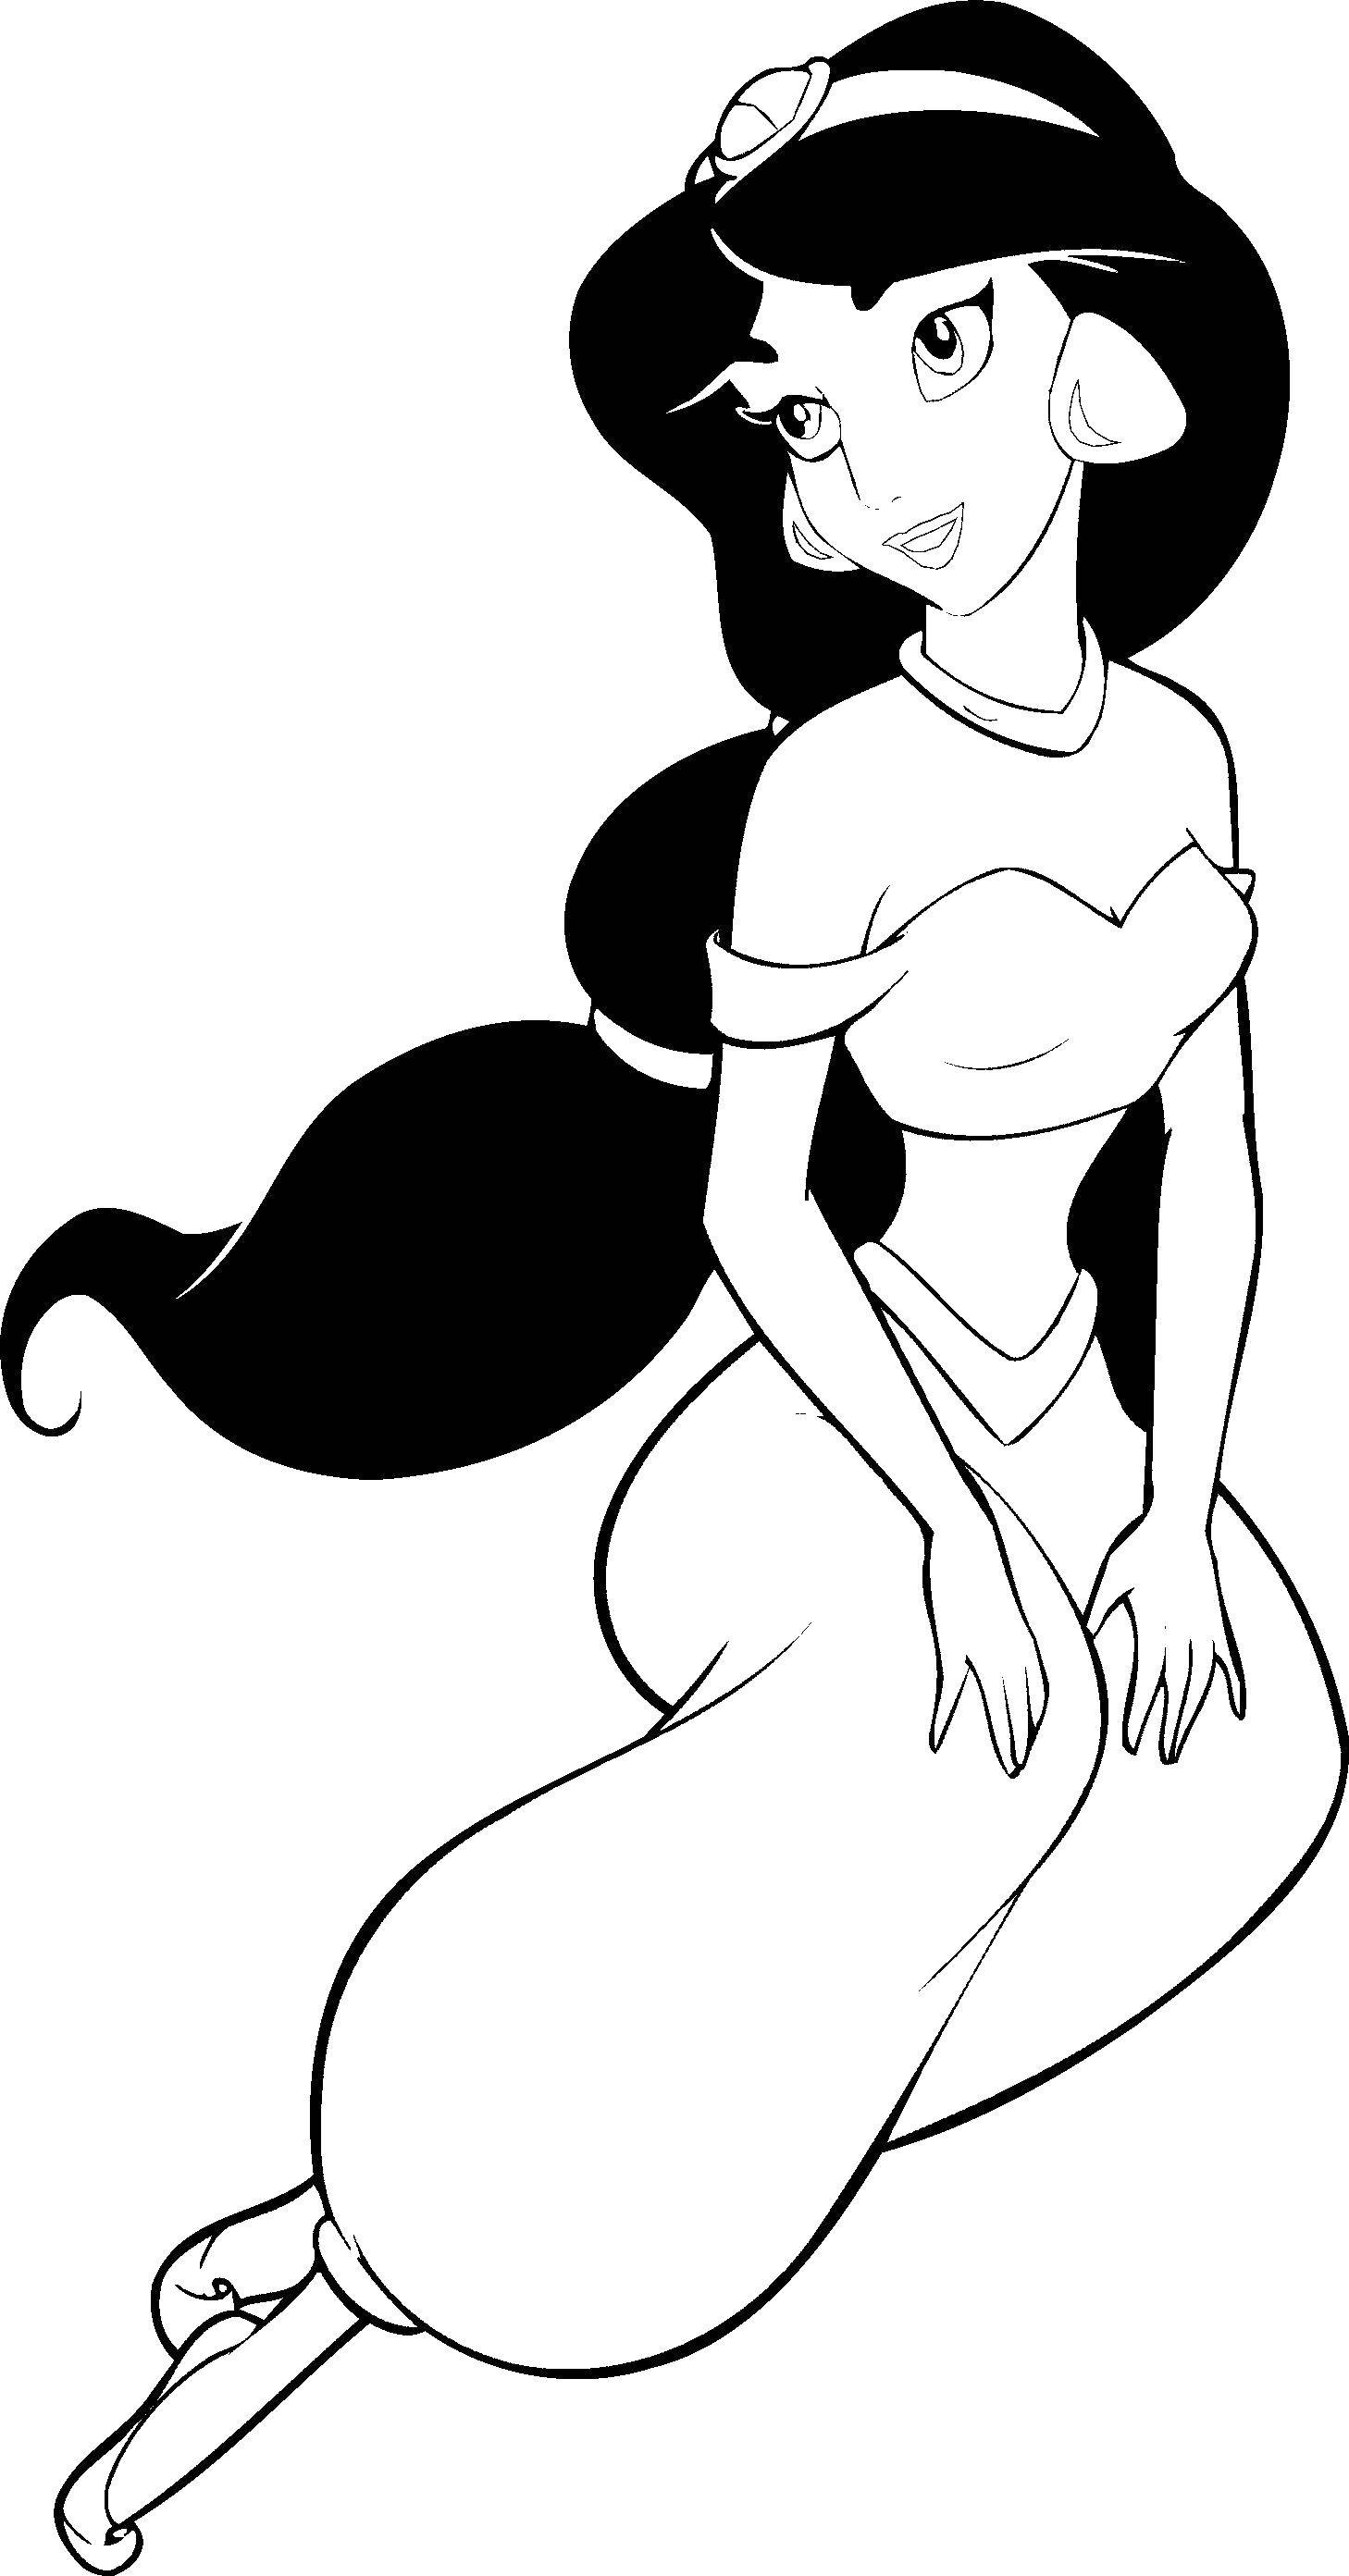 Coloring Jasmine. Category Disney coloring pages. Tags:  Disney, Aladdin, Jasmine.